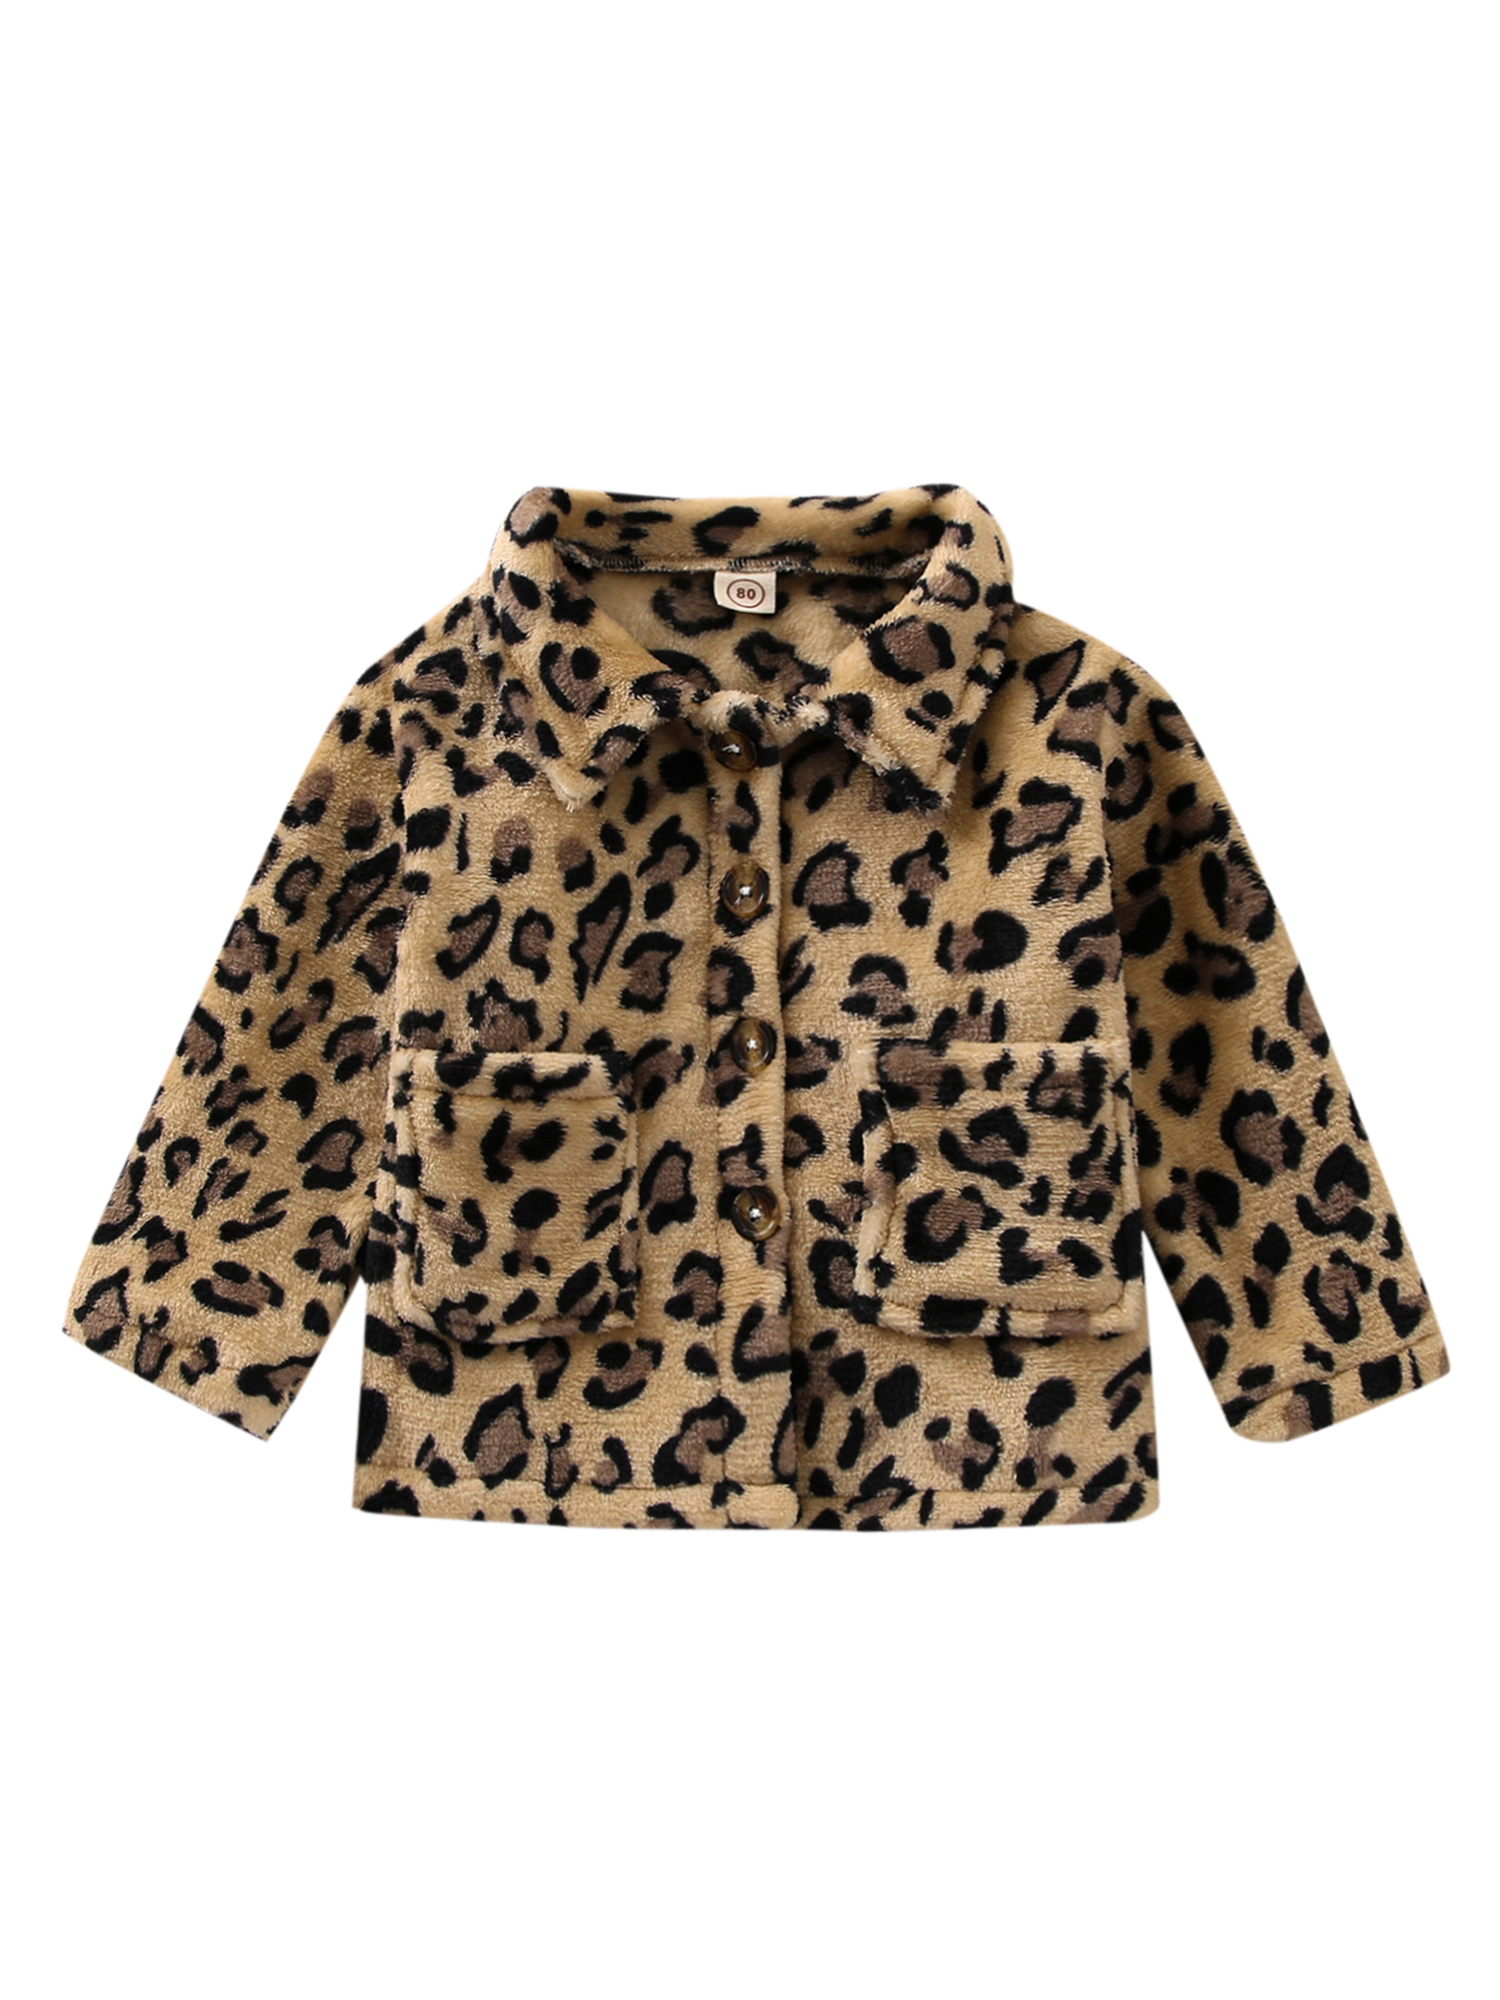 One opening Toddler Baby Winter Jacket Fashion Long Sleeve Leopard Print Button Down Plush Coat - image 1 of 9